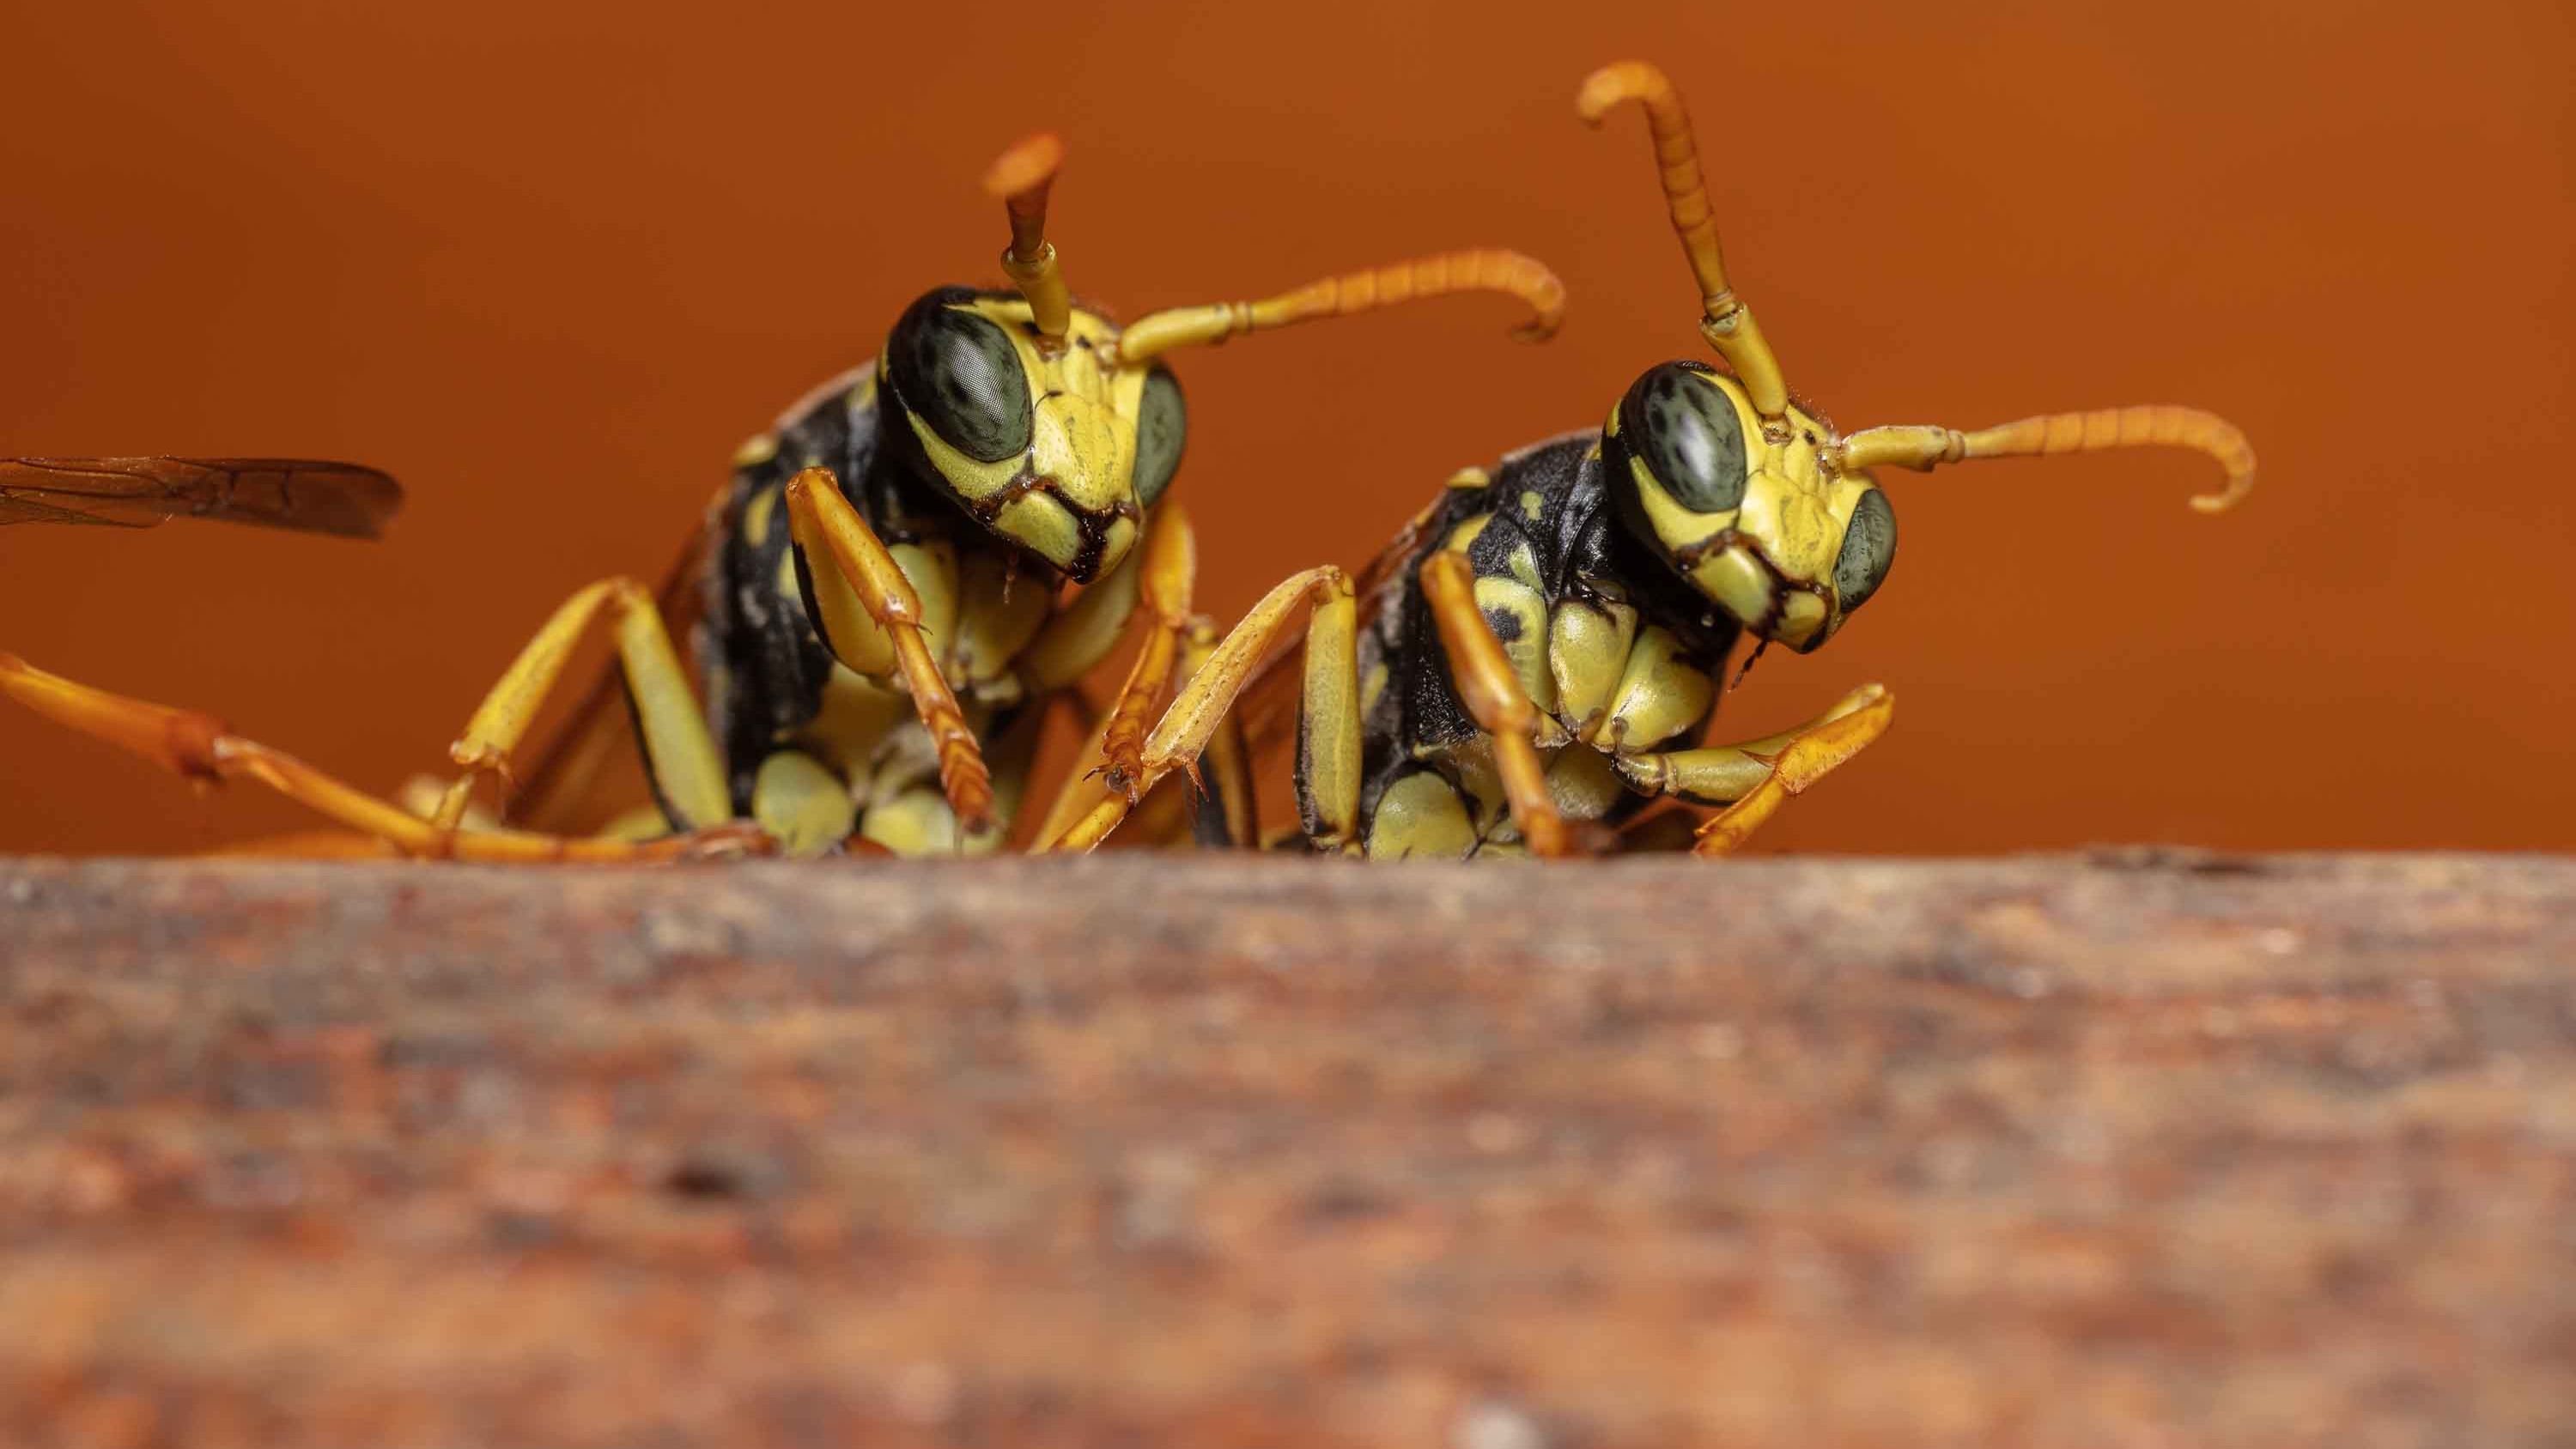 Researchers from the University of Michigan found the wasps could infer unknown relationships from known ones.